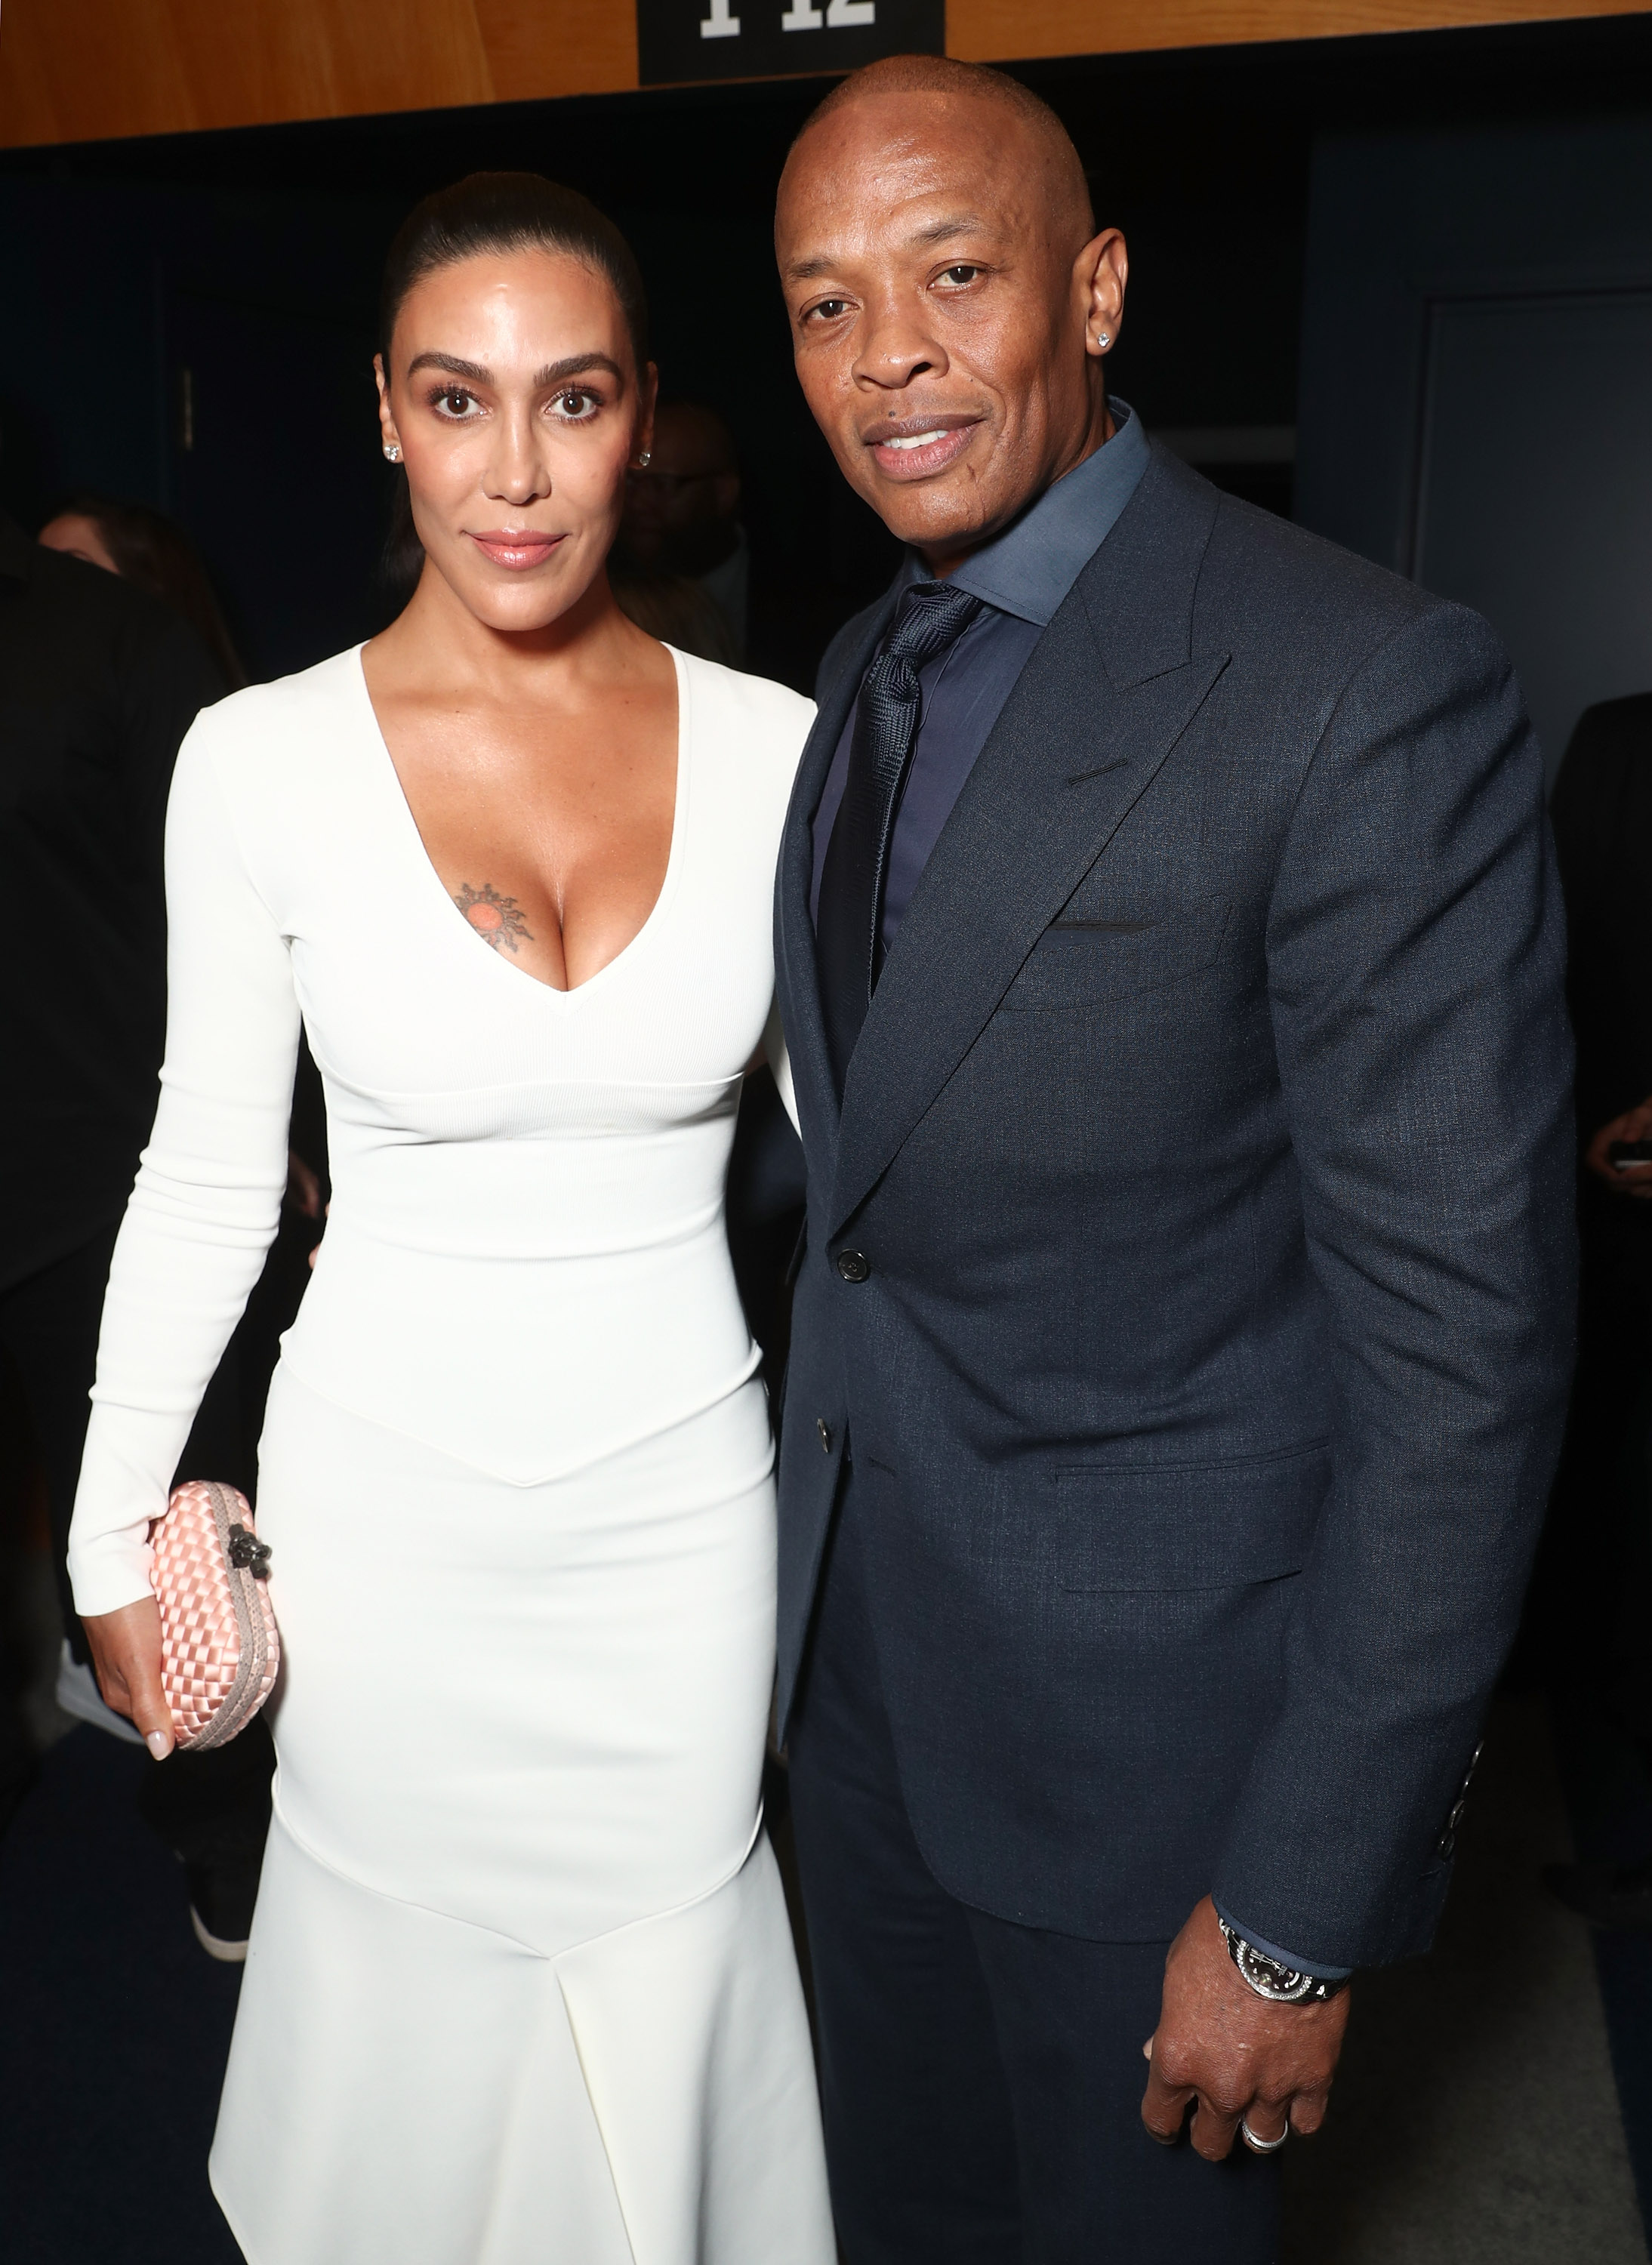 Nicole Threatt and Dr. Dre attend the Los Angeles Premiere of "Can't Stop Won't Stop" at the Writers Guild of America, West on June 21, 2017, in Los Angeles, California. | Source: Getty Images